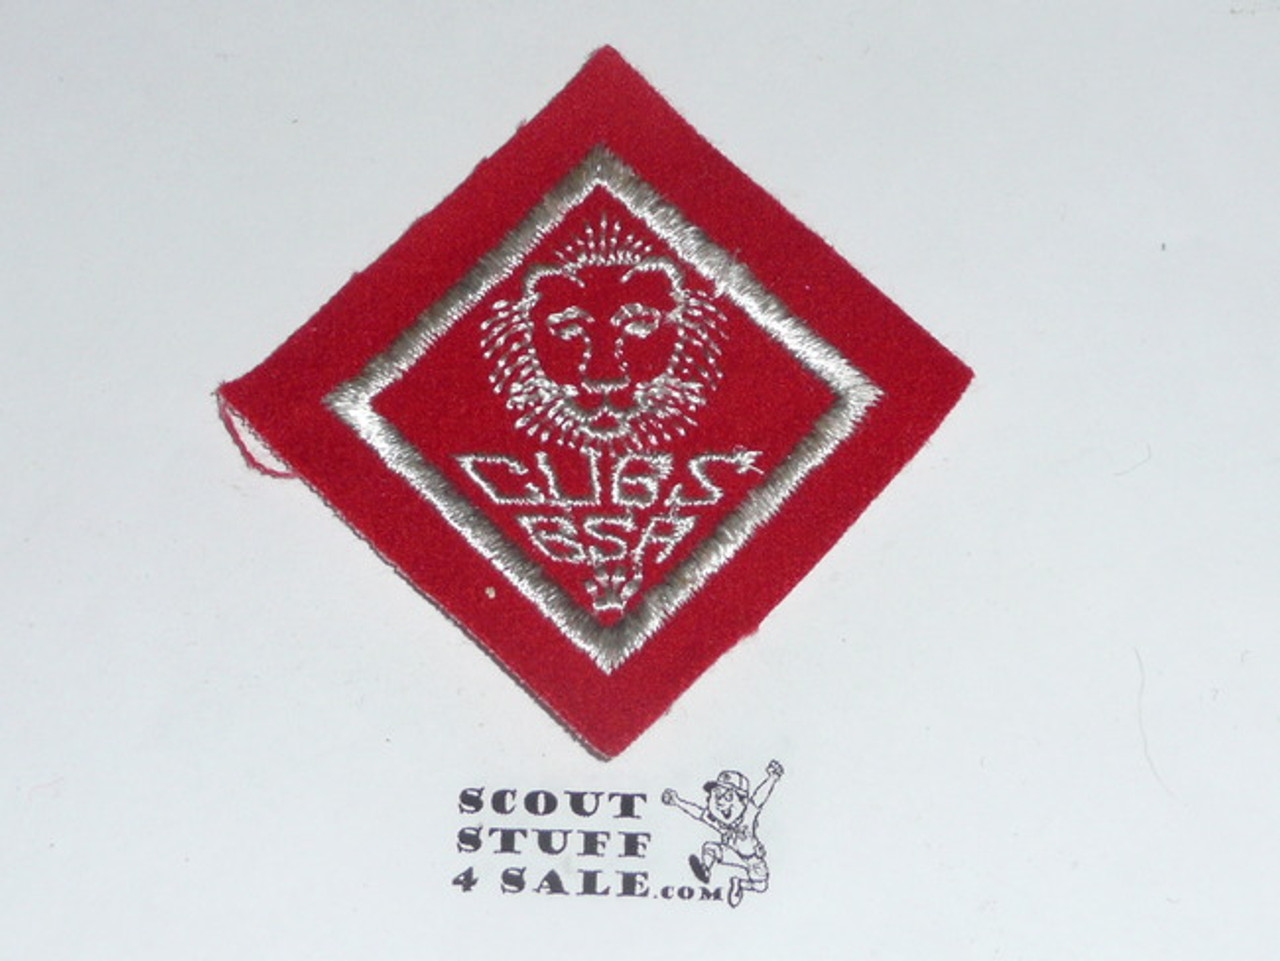 Lion Cub Scout Rank, felt with material extending over edge, EARLY